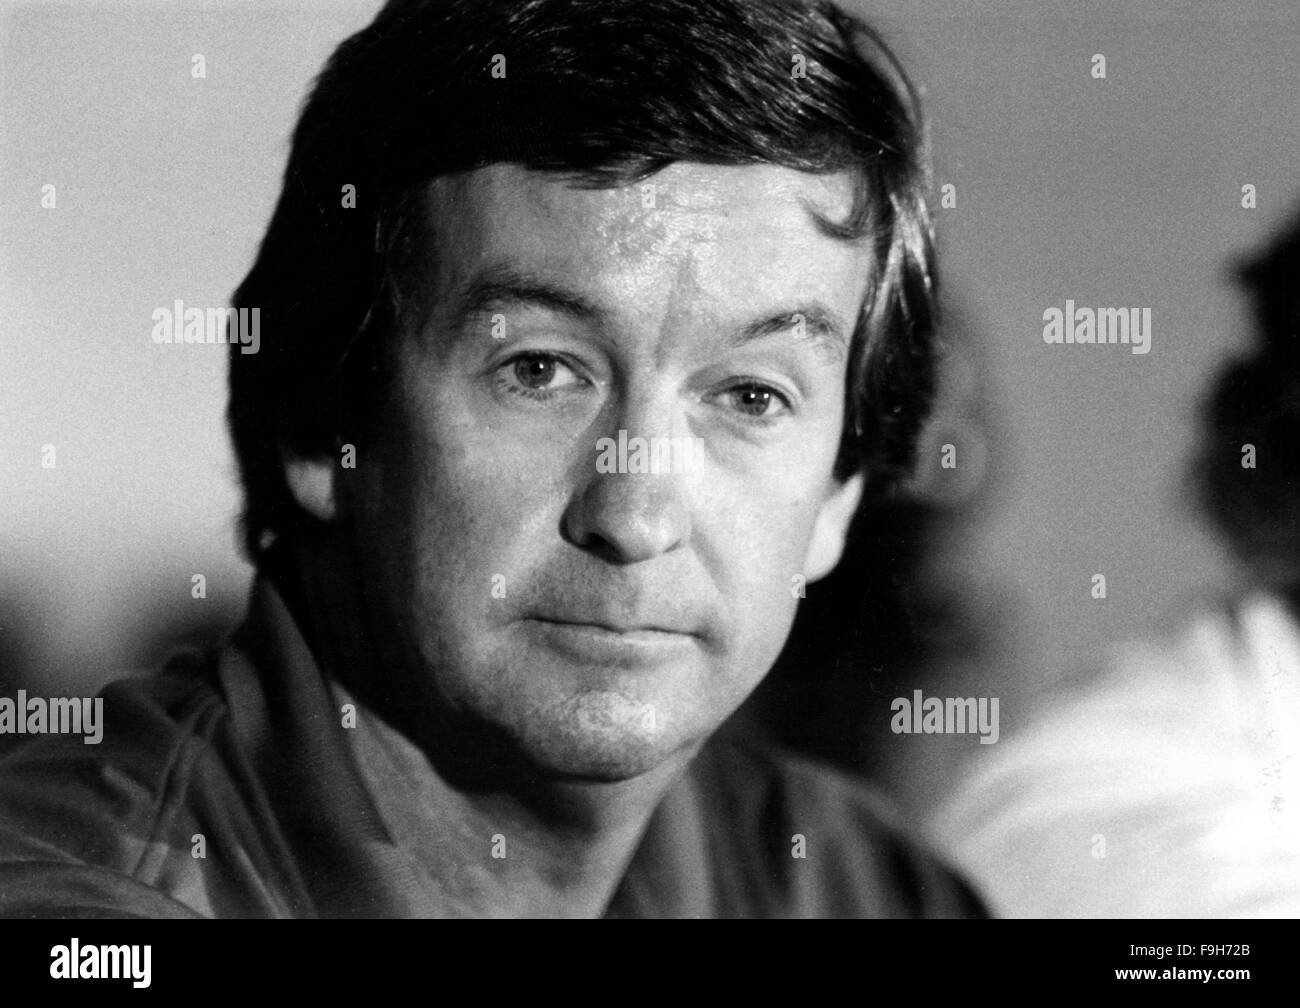 AJAXNETPHOTO - 1986 - FREMANTLE, WESTERN AUSTRALIA - AMERICA'S CUP - MICHAEL FAY, NEW ZEALAND BANKER, ANSWERS QUESTIONS AT A PRESS CONFERENCE. PHOTO:JONATHAN EASTLAND/AJAX REF:HDD PEO FAY.M 1986 Stock Photo